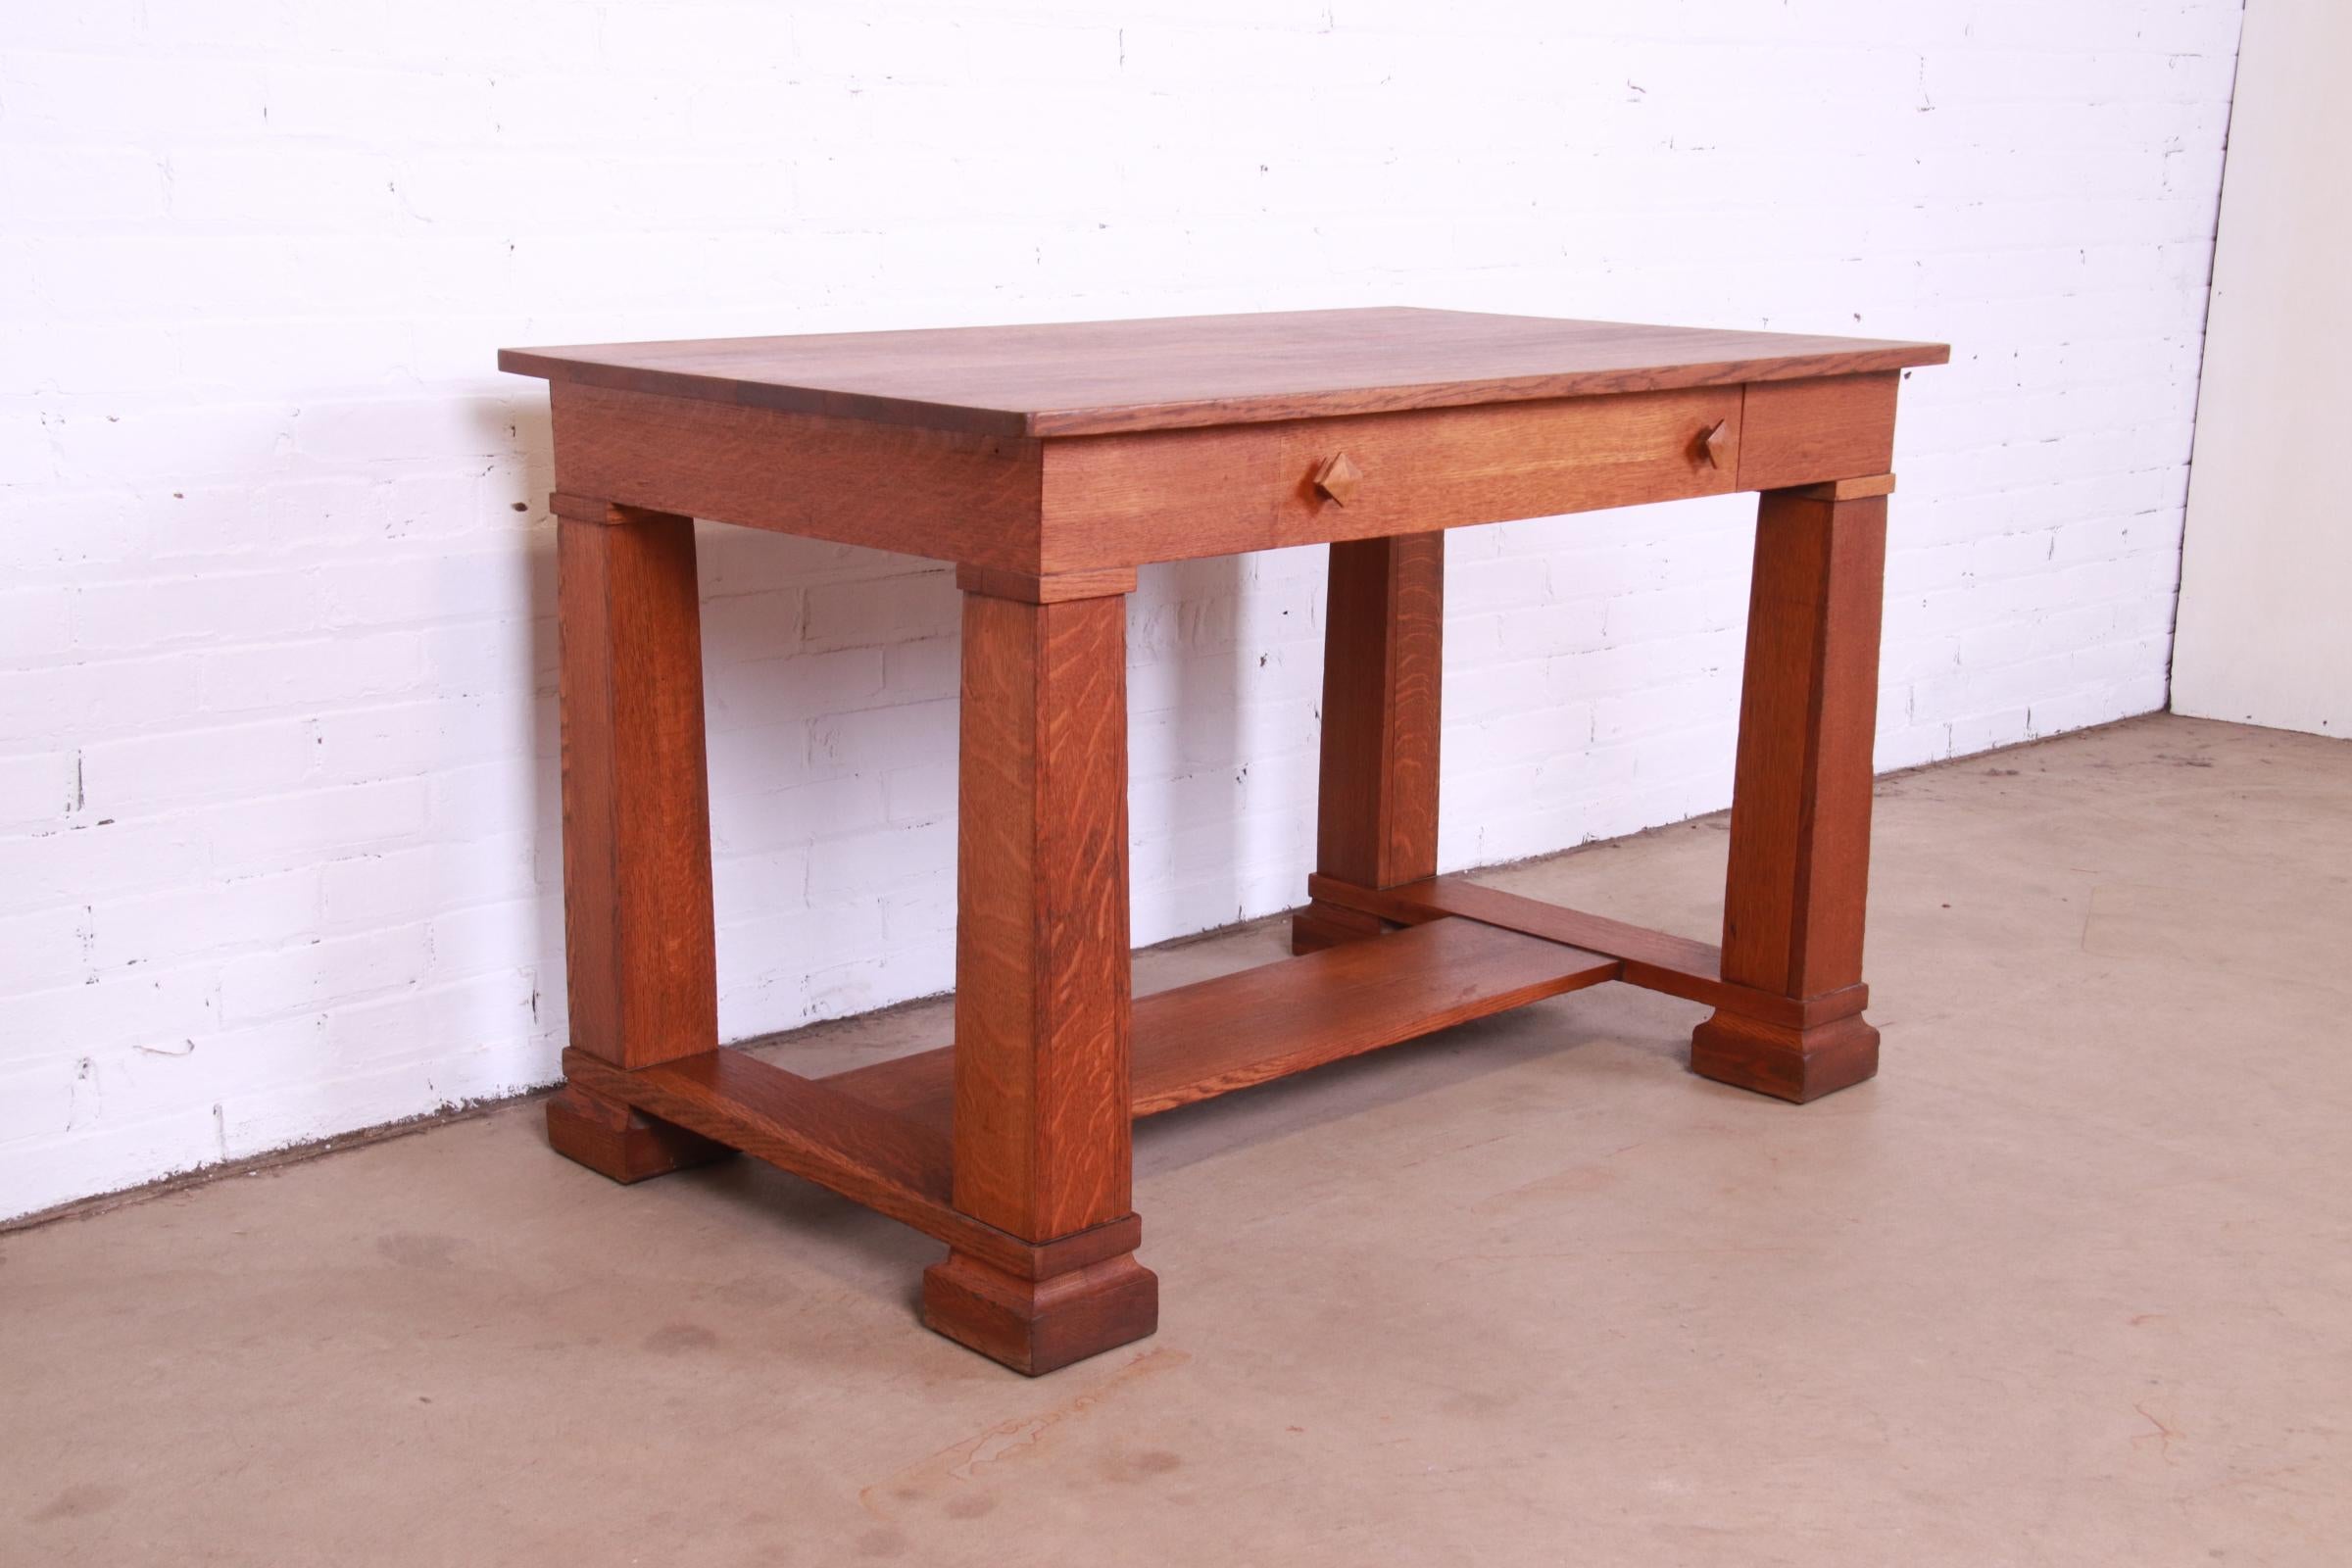 American Antique Mission Oak Arts & Crafts Writing Desk or Library Table, circa 1900